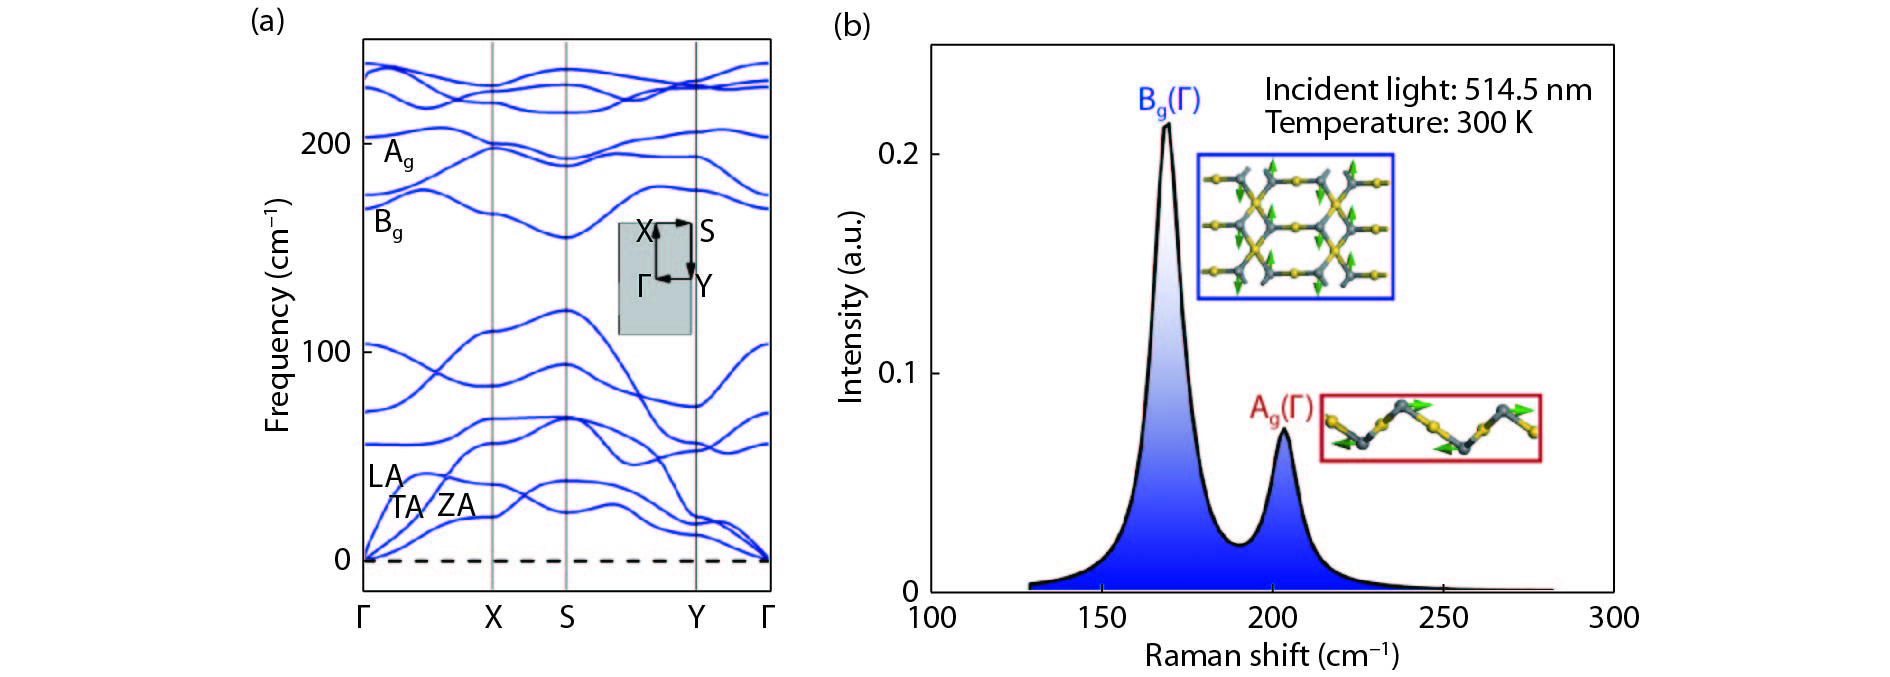 (Color online) (a) Phonon spectrum of AuSe monolayer. (b) Simulation spectrum of Raman shift with exciting wavelength of 514.5 nm at 300 K and corresponding schematic diagram of vibration modes (inset).